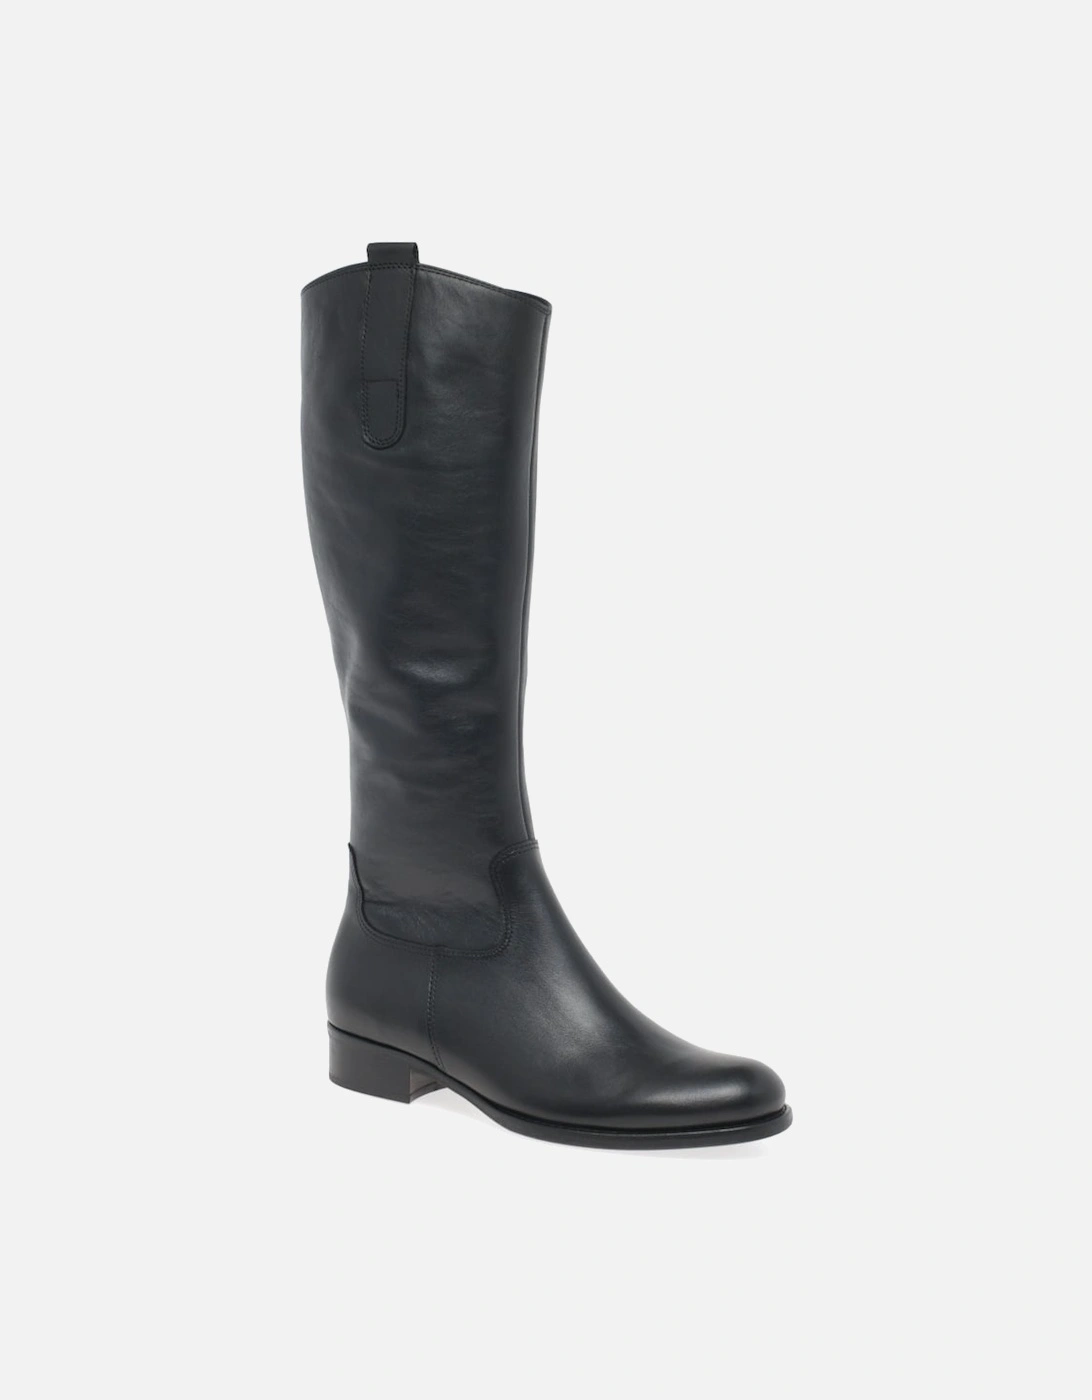 Gabor Brook S Womens Knee High Boots Colour: Black, Size: 3